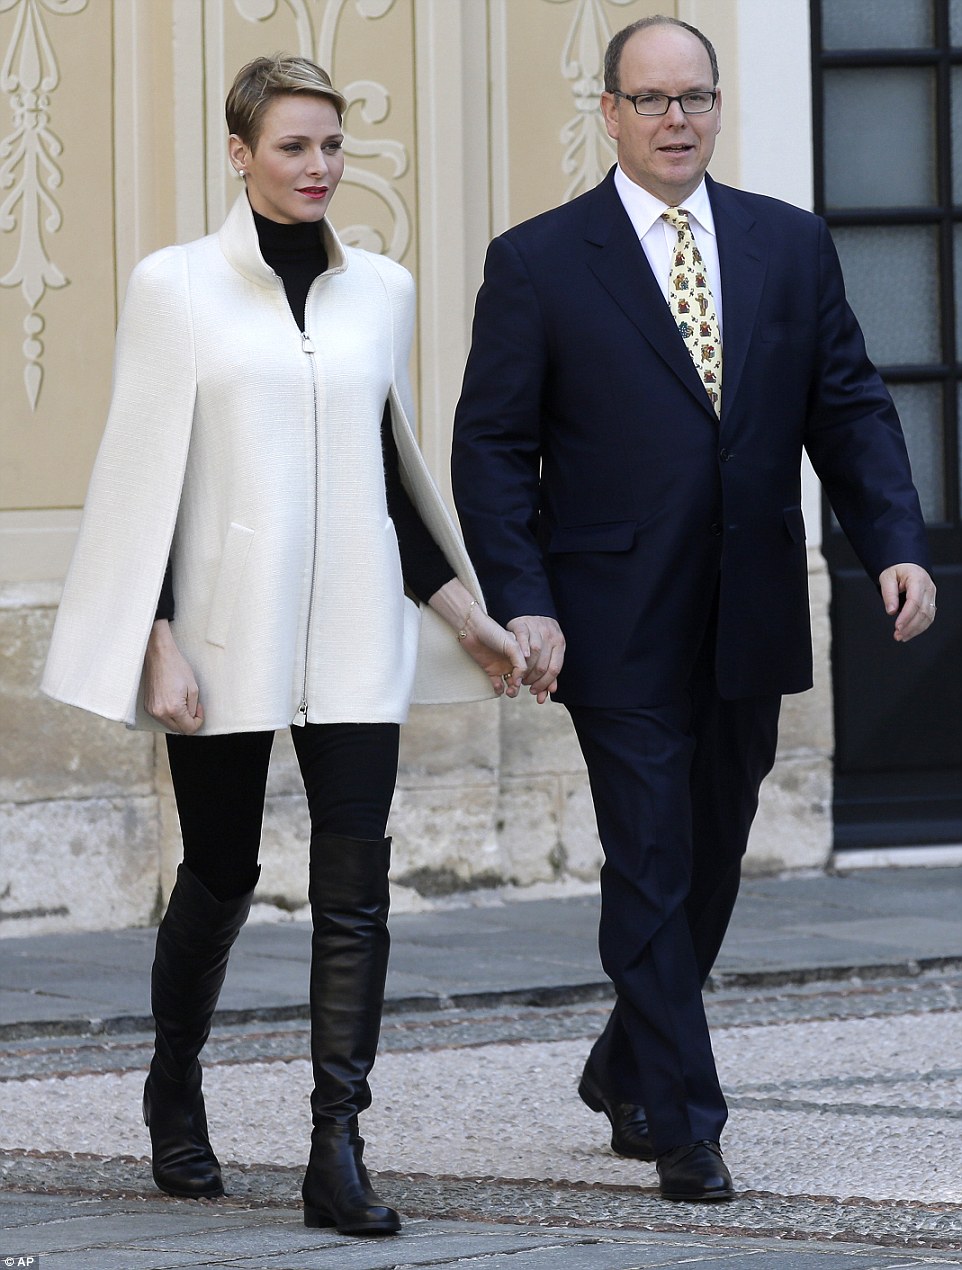 2F6D23F200000578-3362739-The_happy_couple_held_hands_as_they_walked_across_the_palace_gro-a-19_1450288664965.jpg